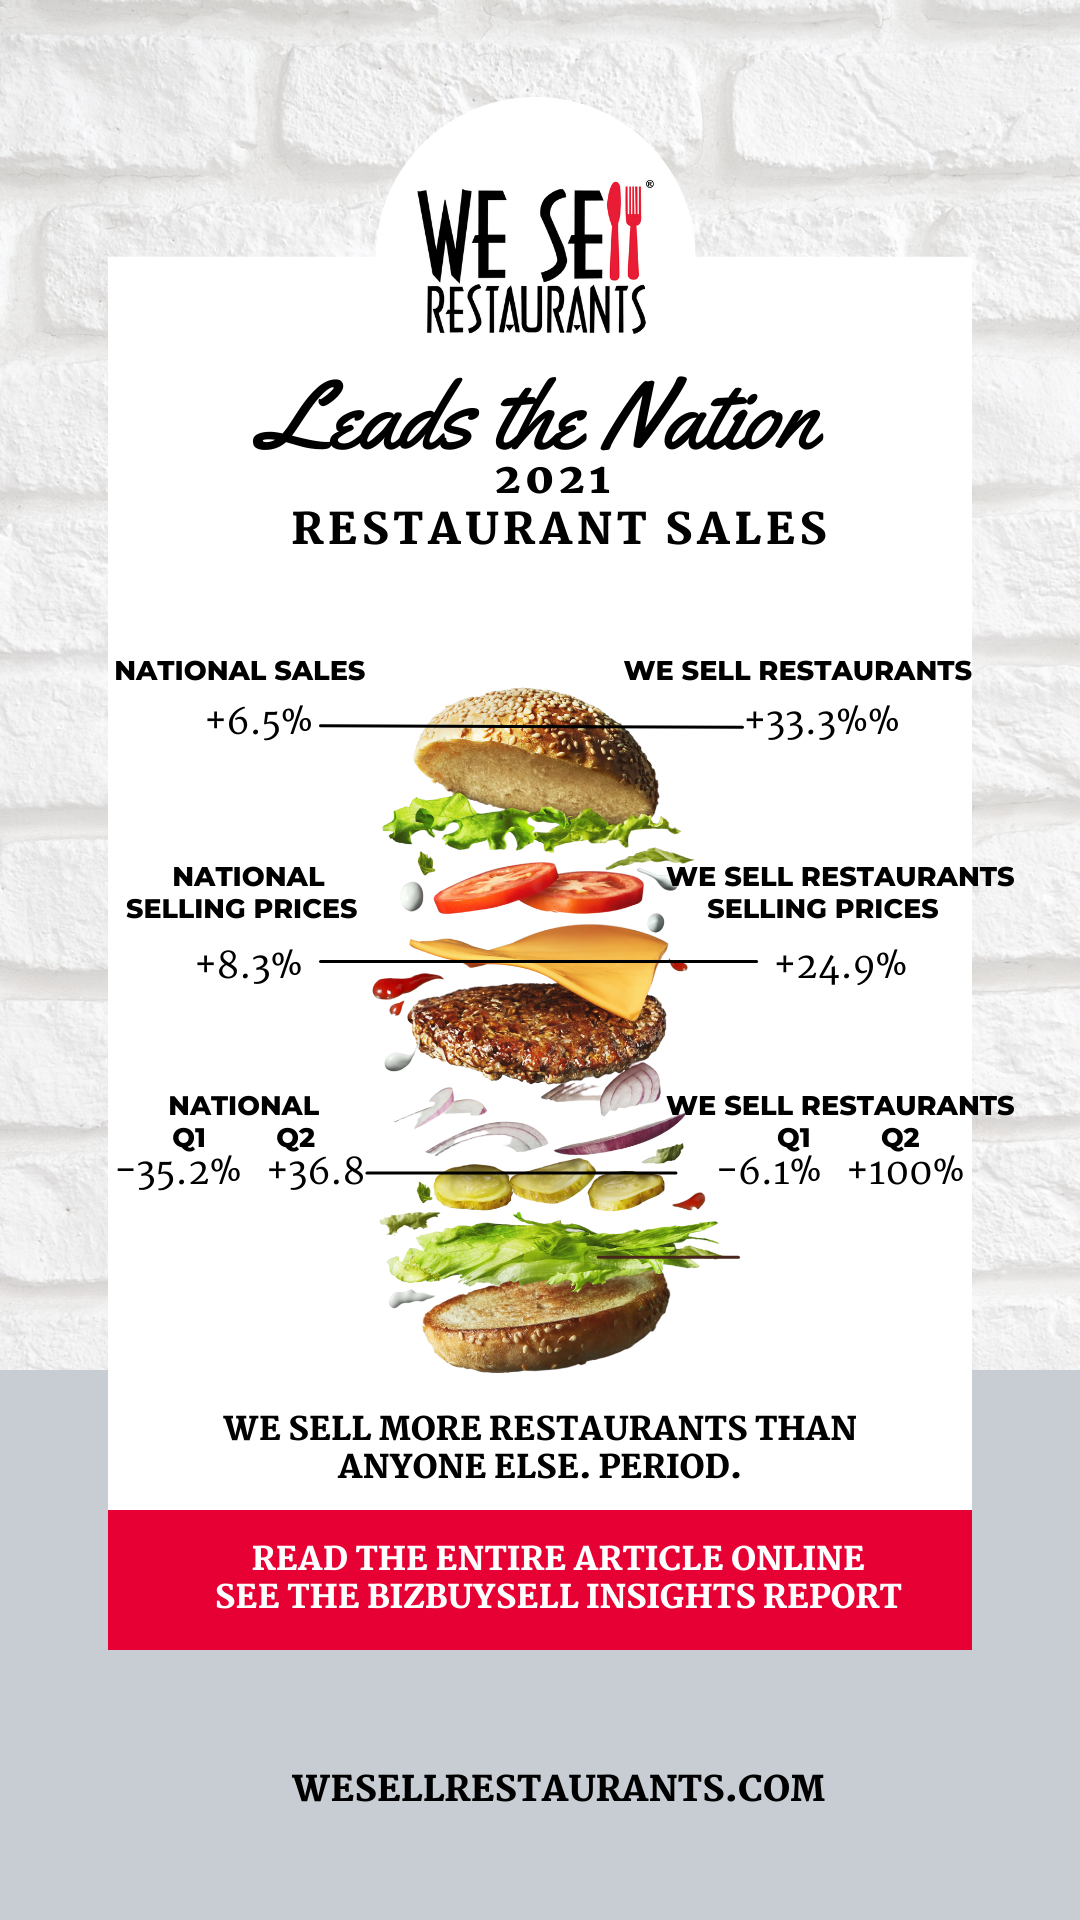 We Sell Restaurants Leads the nation-1